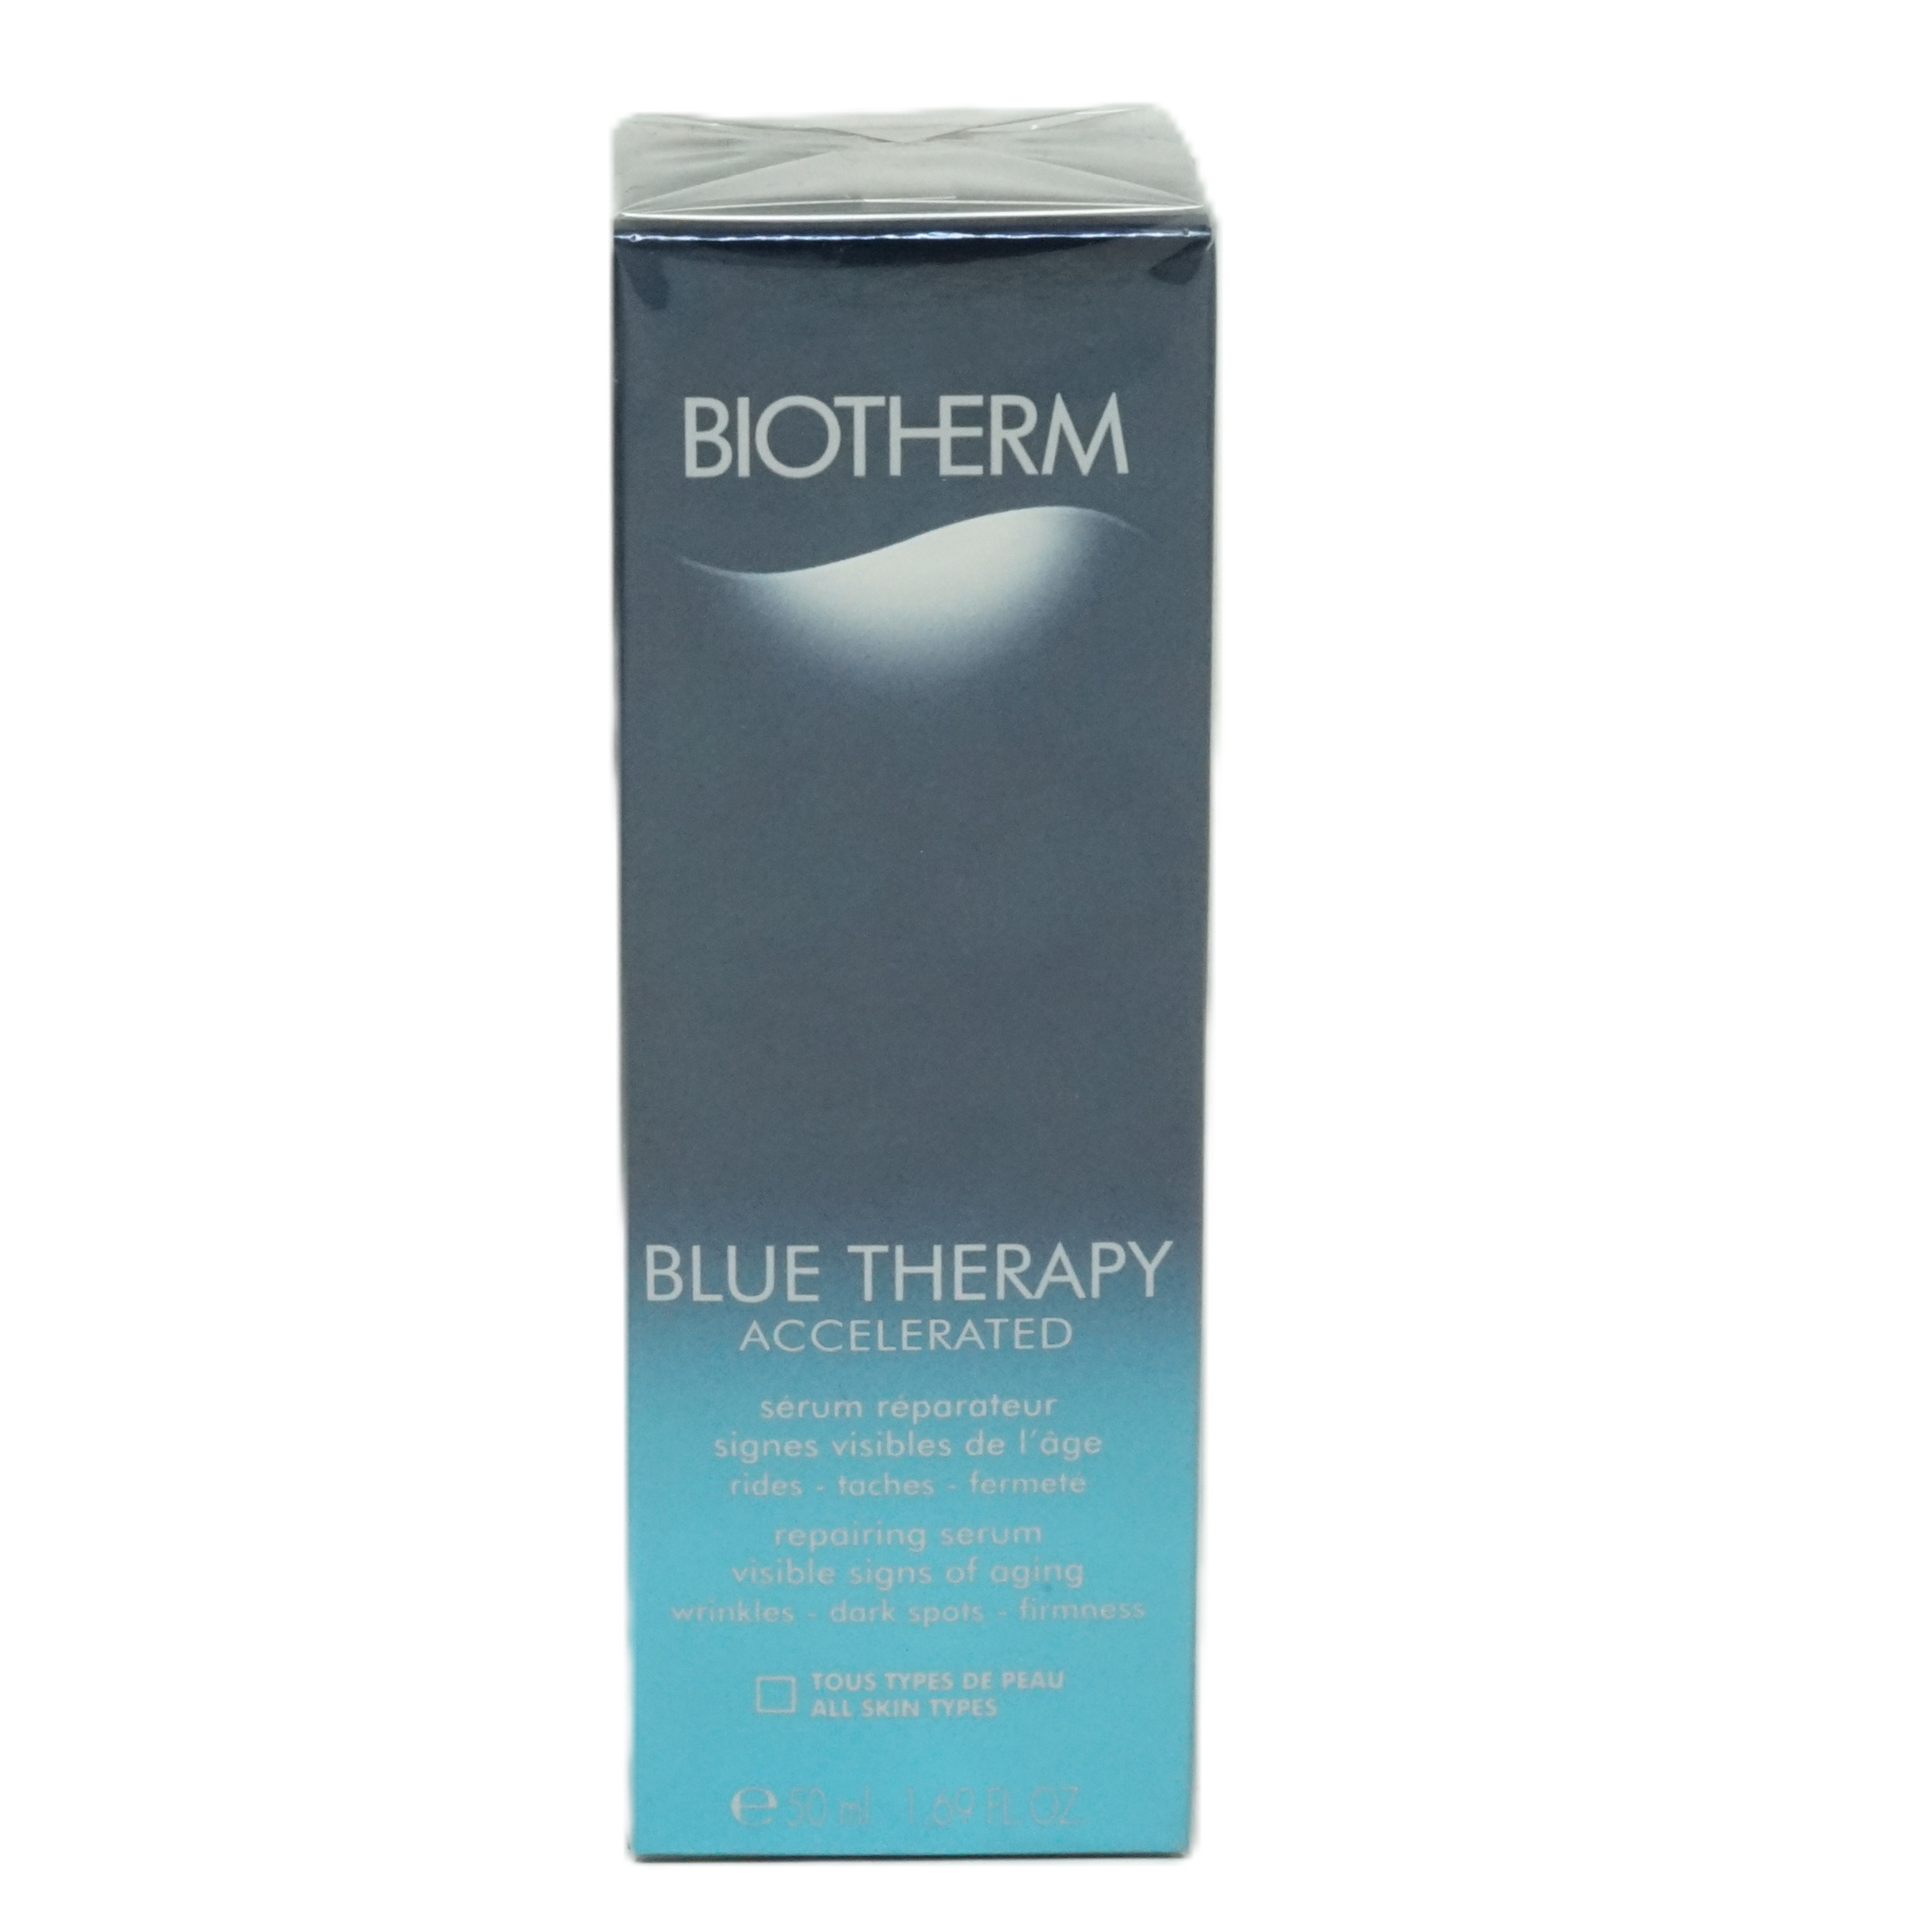 Biotherm Blue Therapy Accelerated repairing Serum 50ml